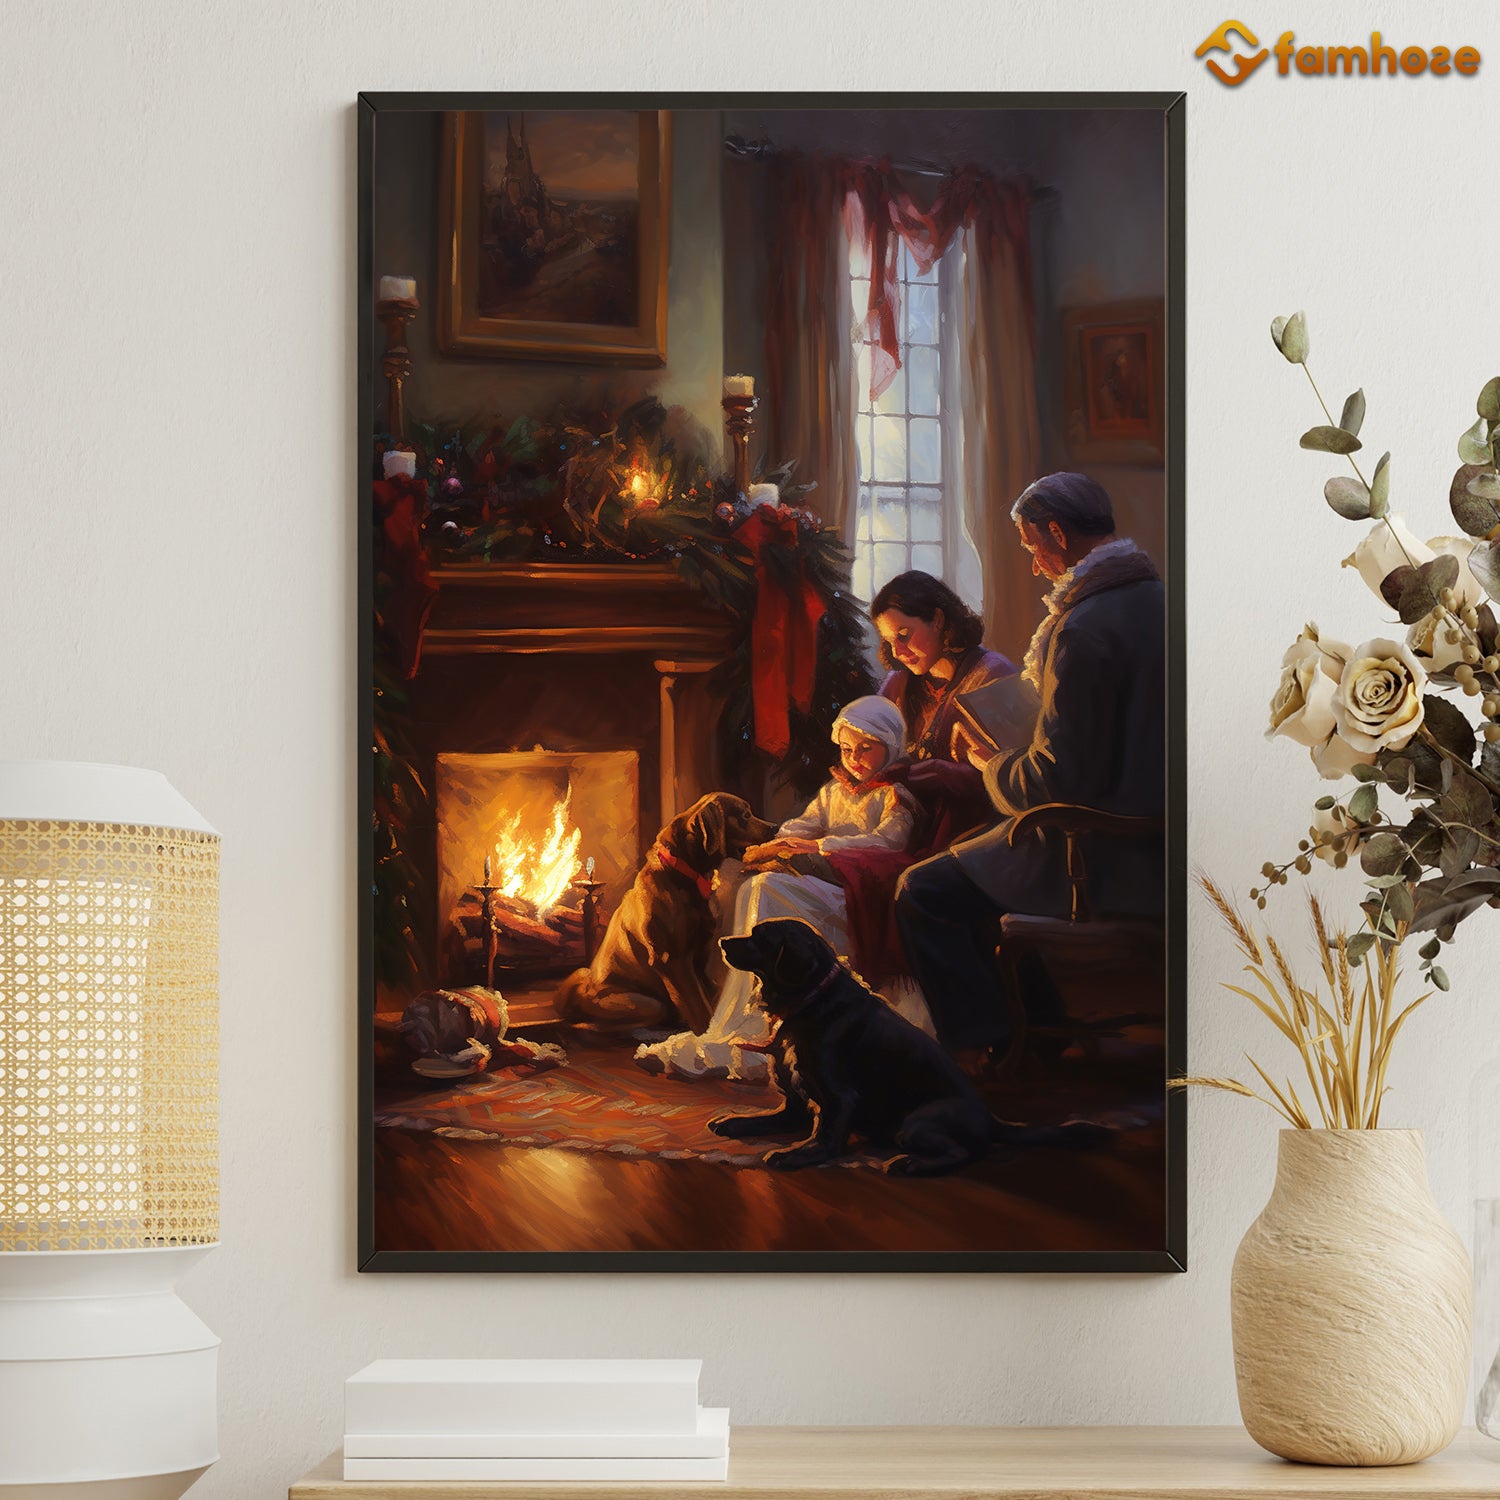 A Fireplace Printed Sherpa Fleece Blanket Oil Painting Design in